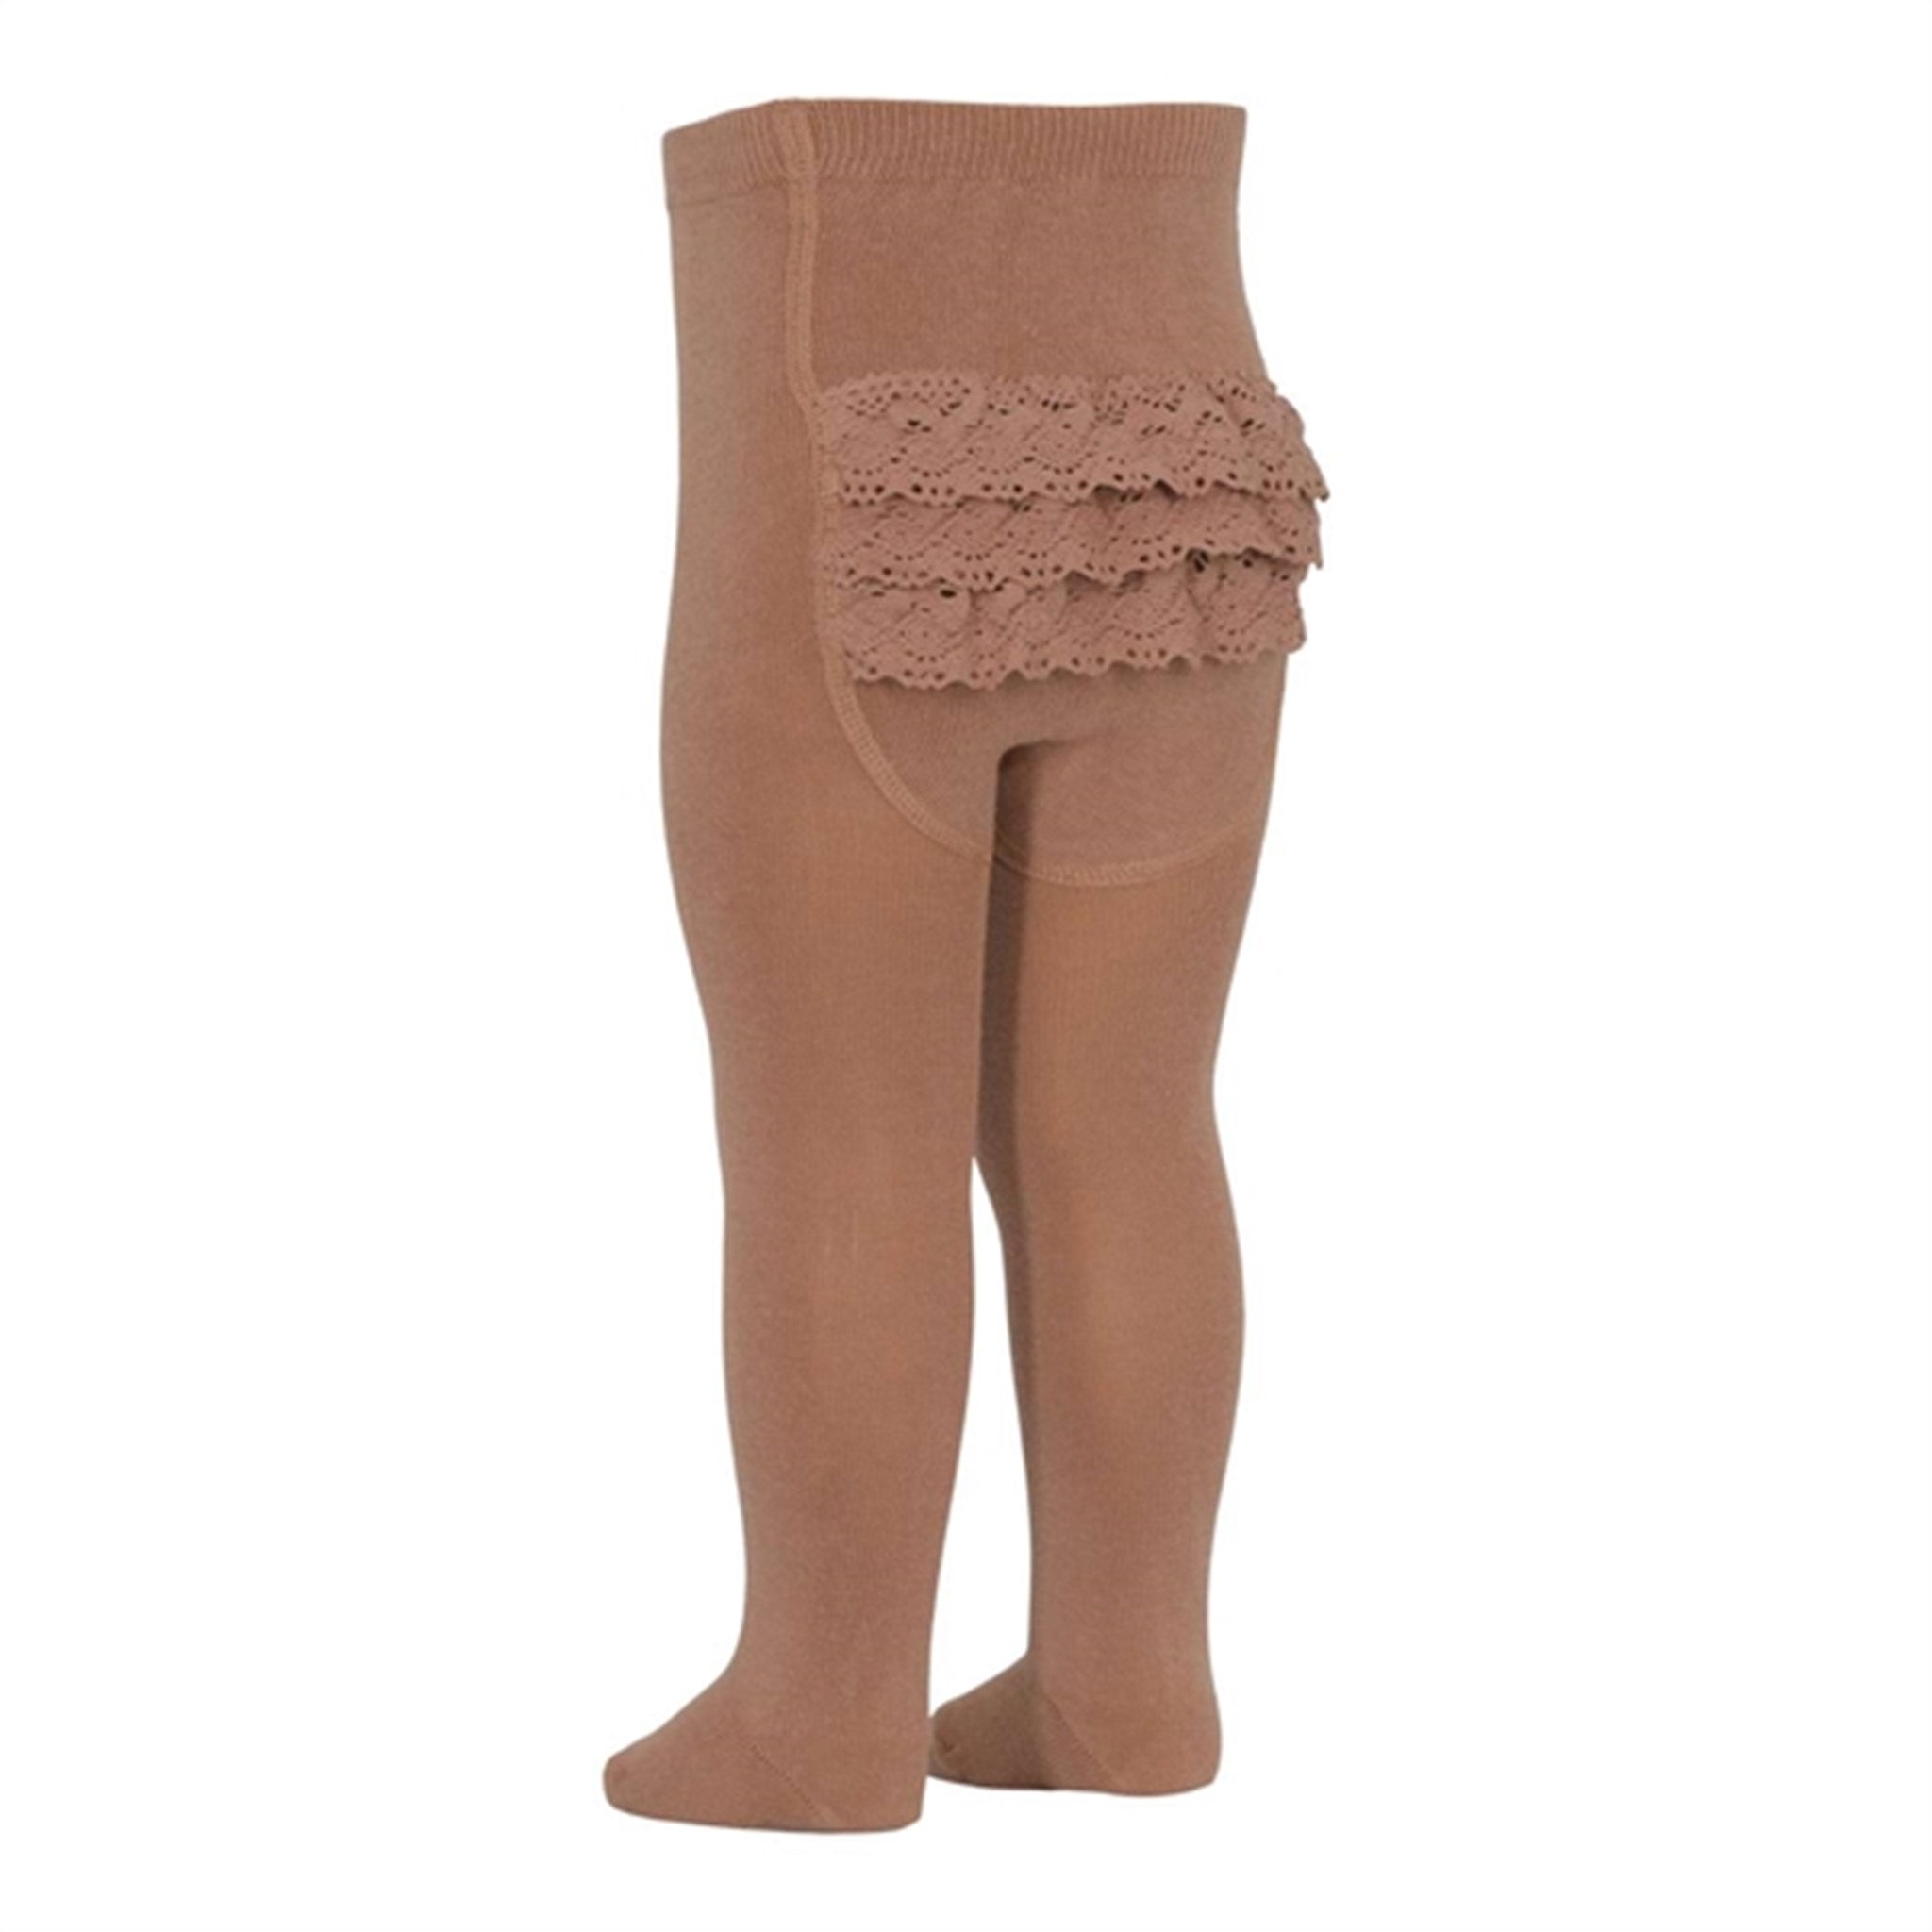 MP 350 Cotton Tights Lace 858 Tawny Brown